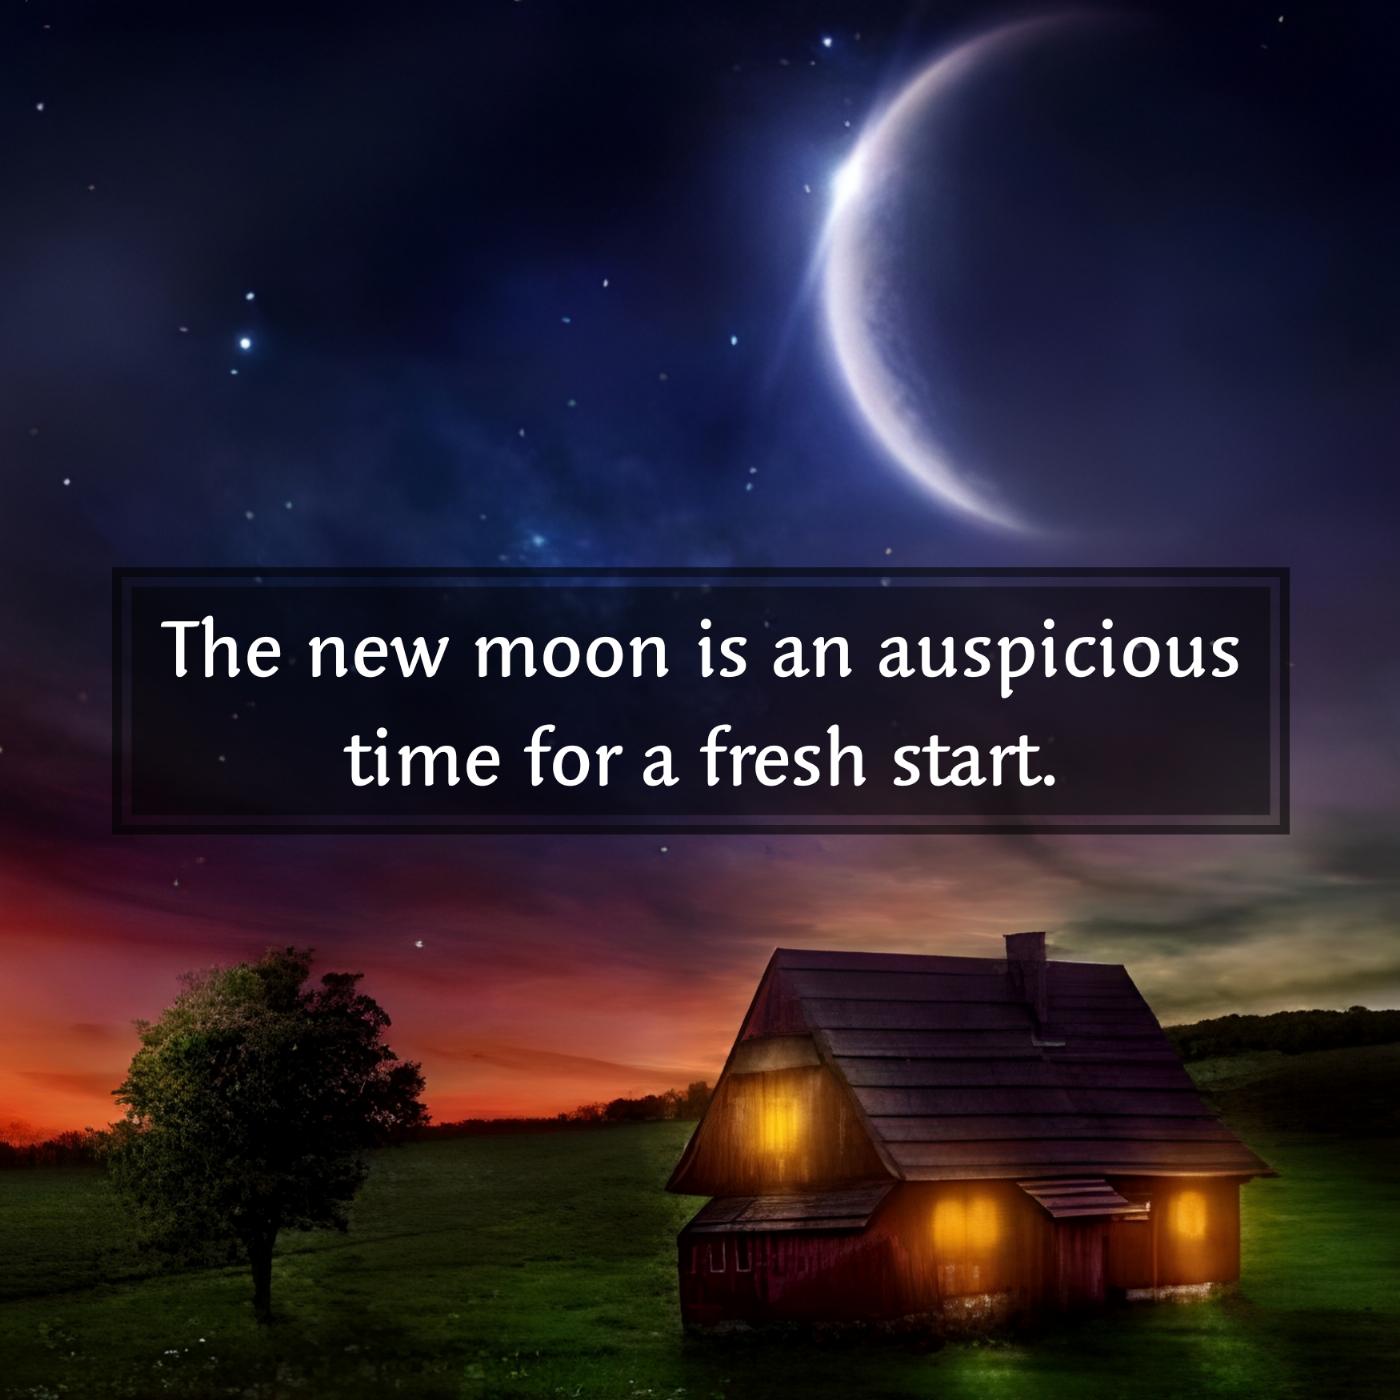 The new Moon is an auspicious time for a fresh start